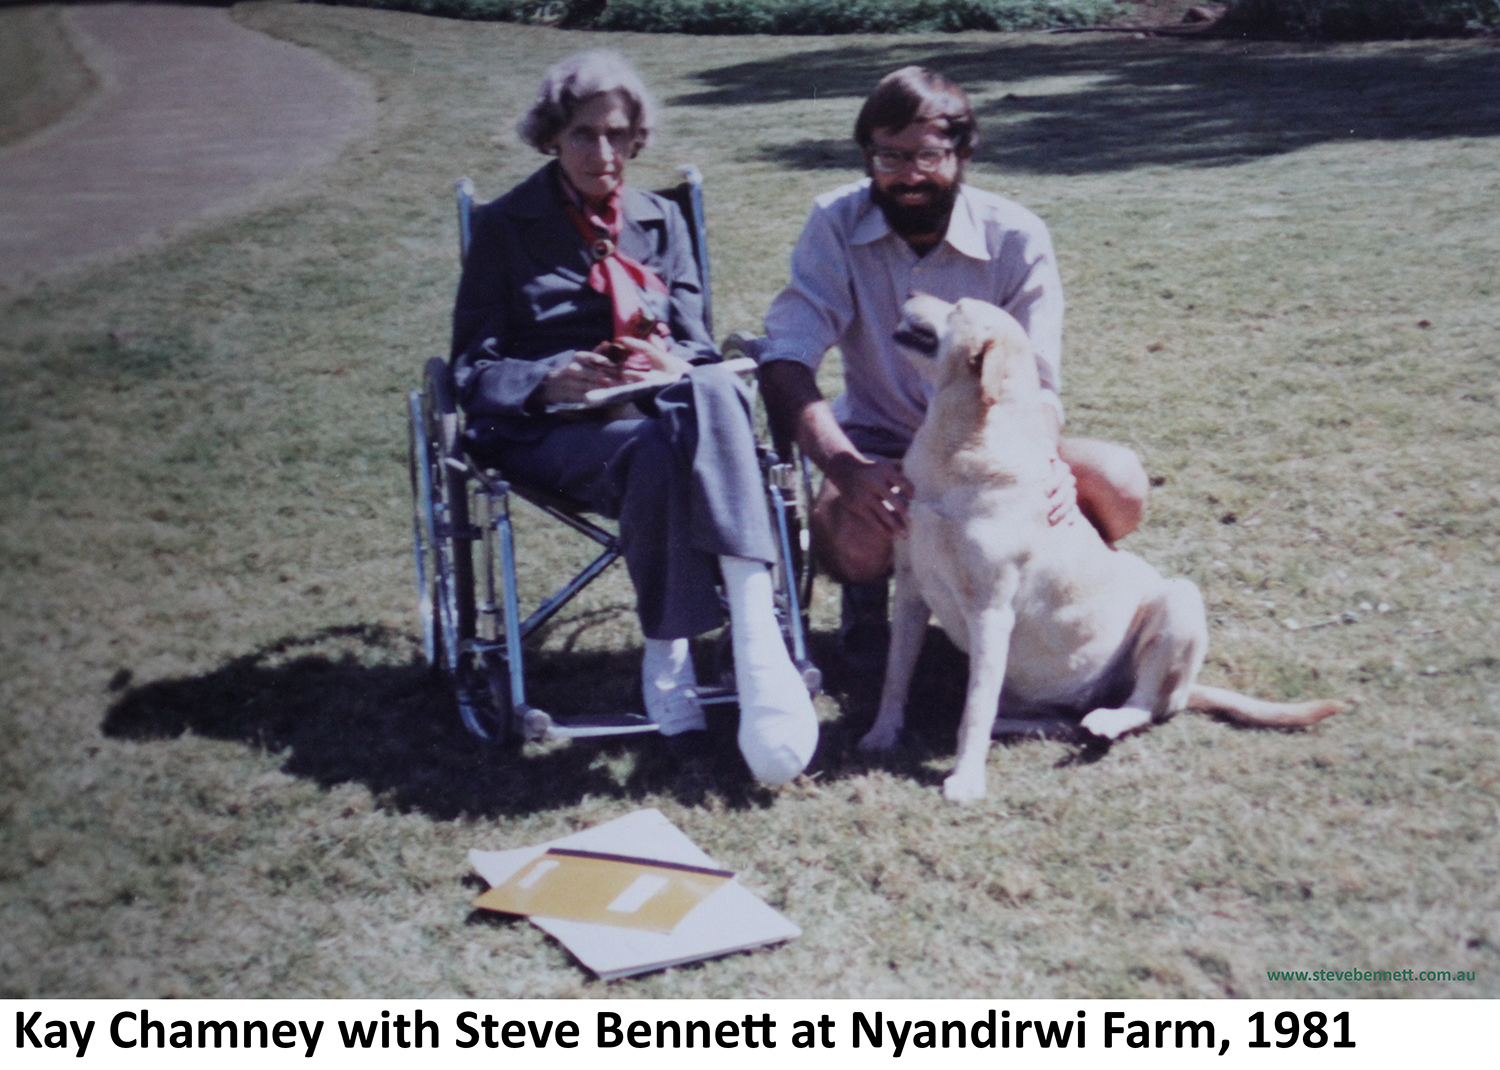 Kay Chamney and Steve Bennett in garden at Nyandirwi Farm when asking for Lynn's hand in marriage in 1981